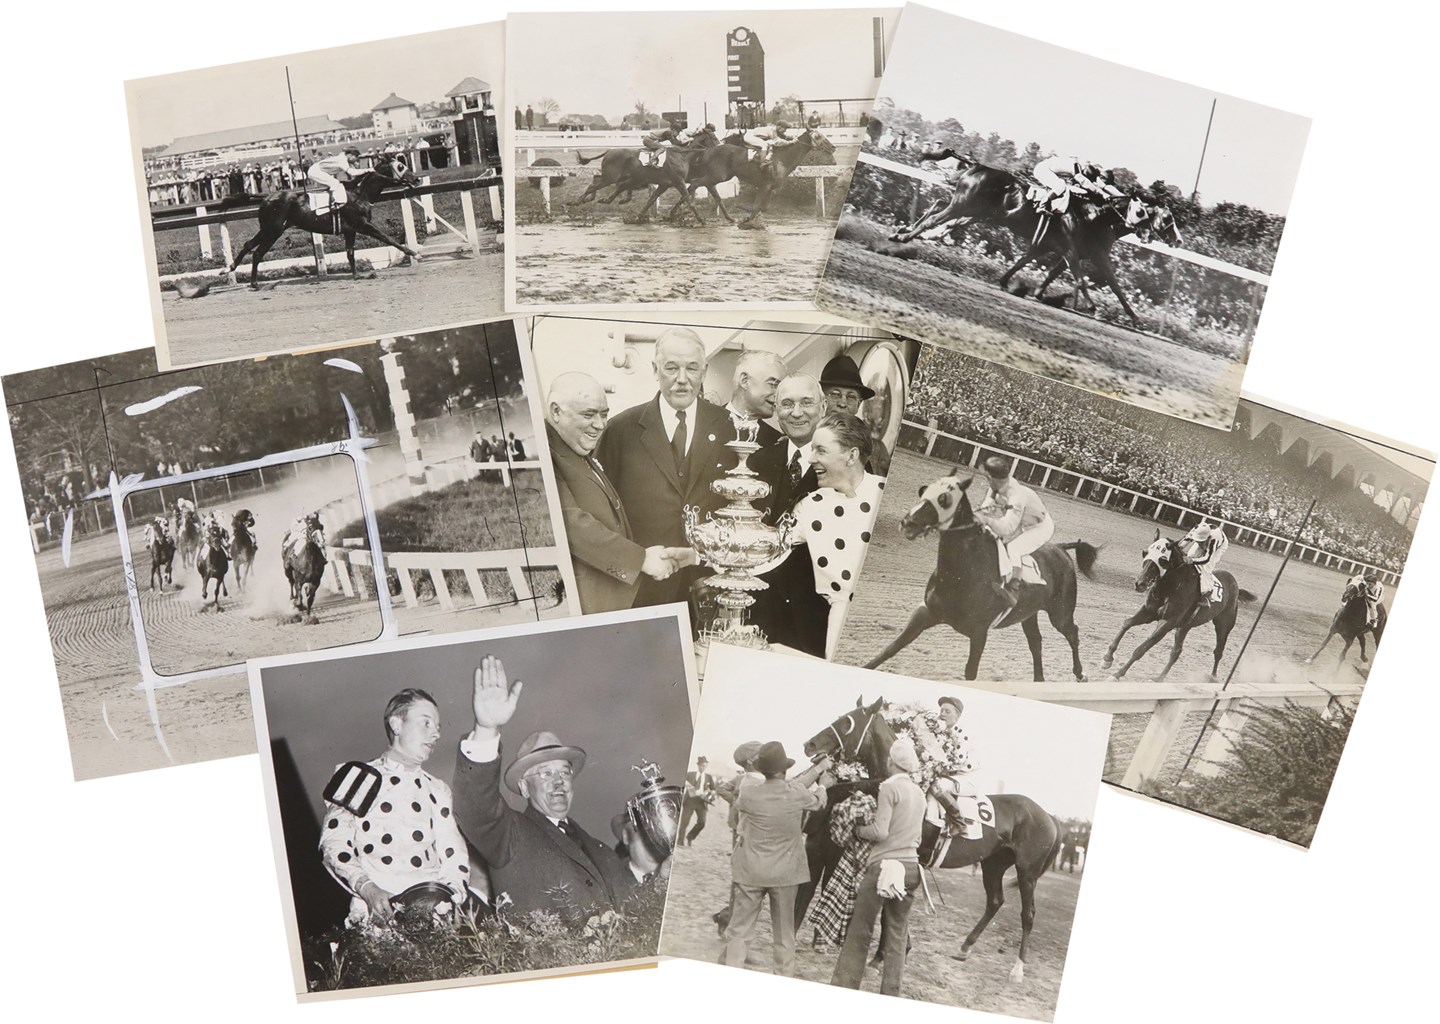 - Triple Crown Winner, Omaha, & Equipoise, Important Racehorses of The 1930s (35)